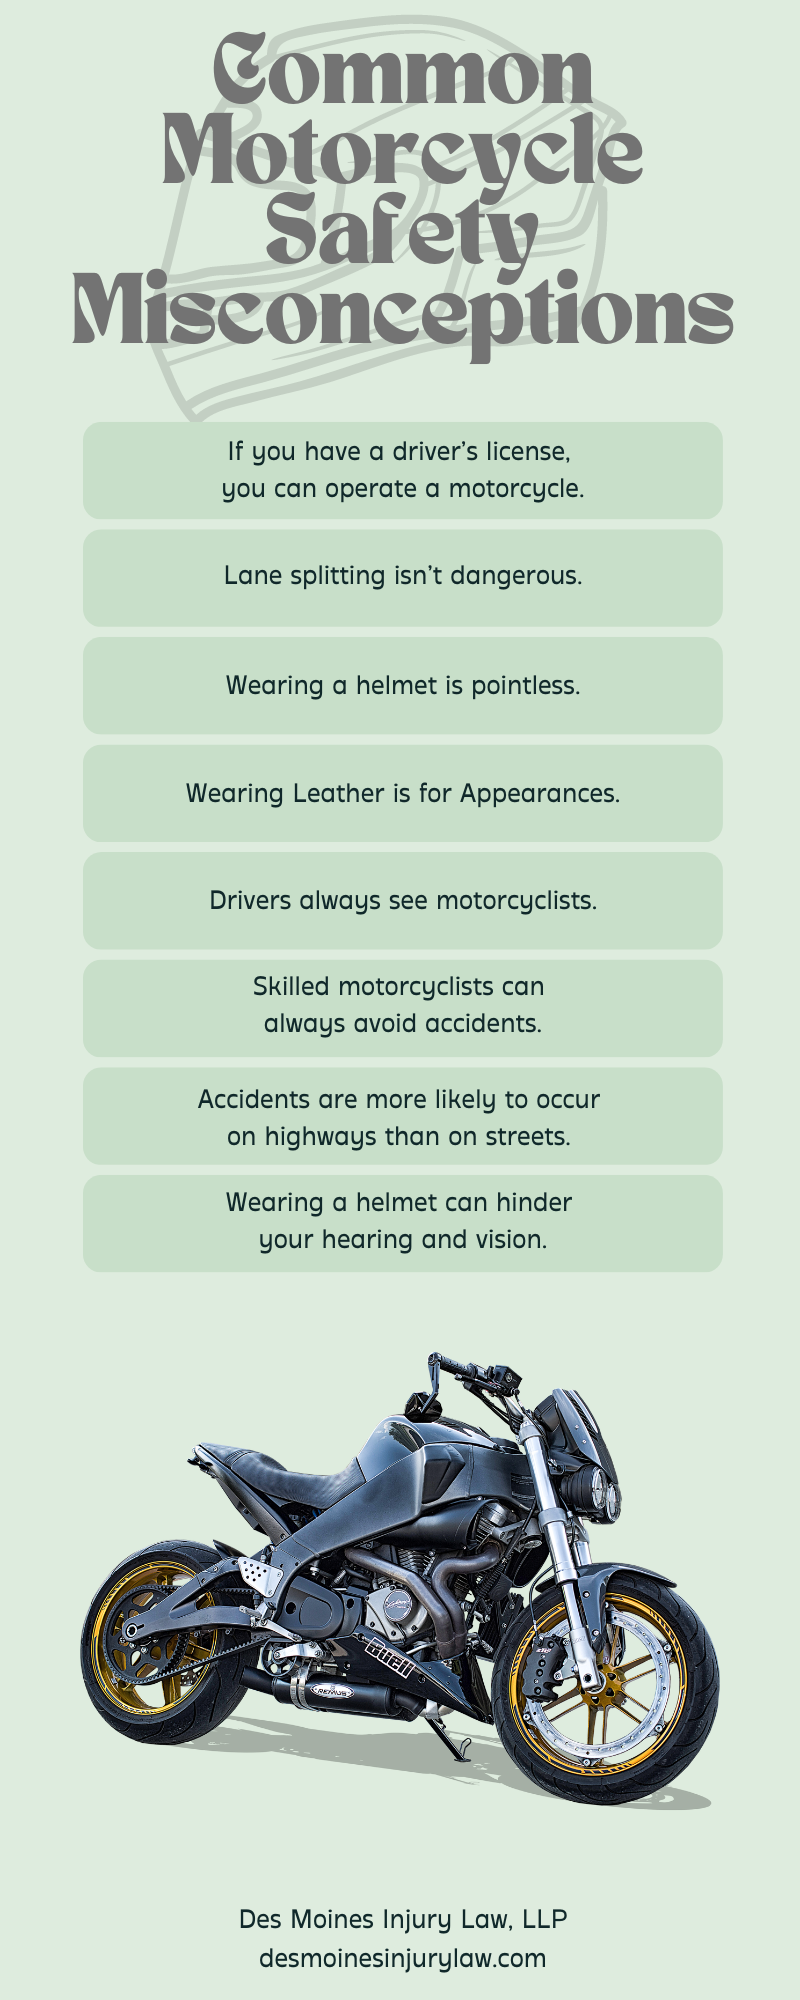 Common Motorcycle Safety Misconceptions Infographic